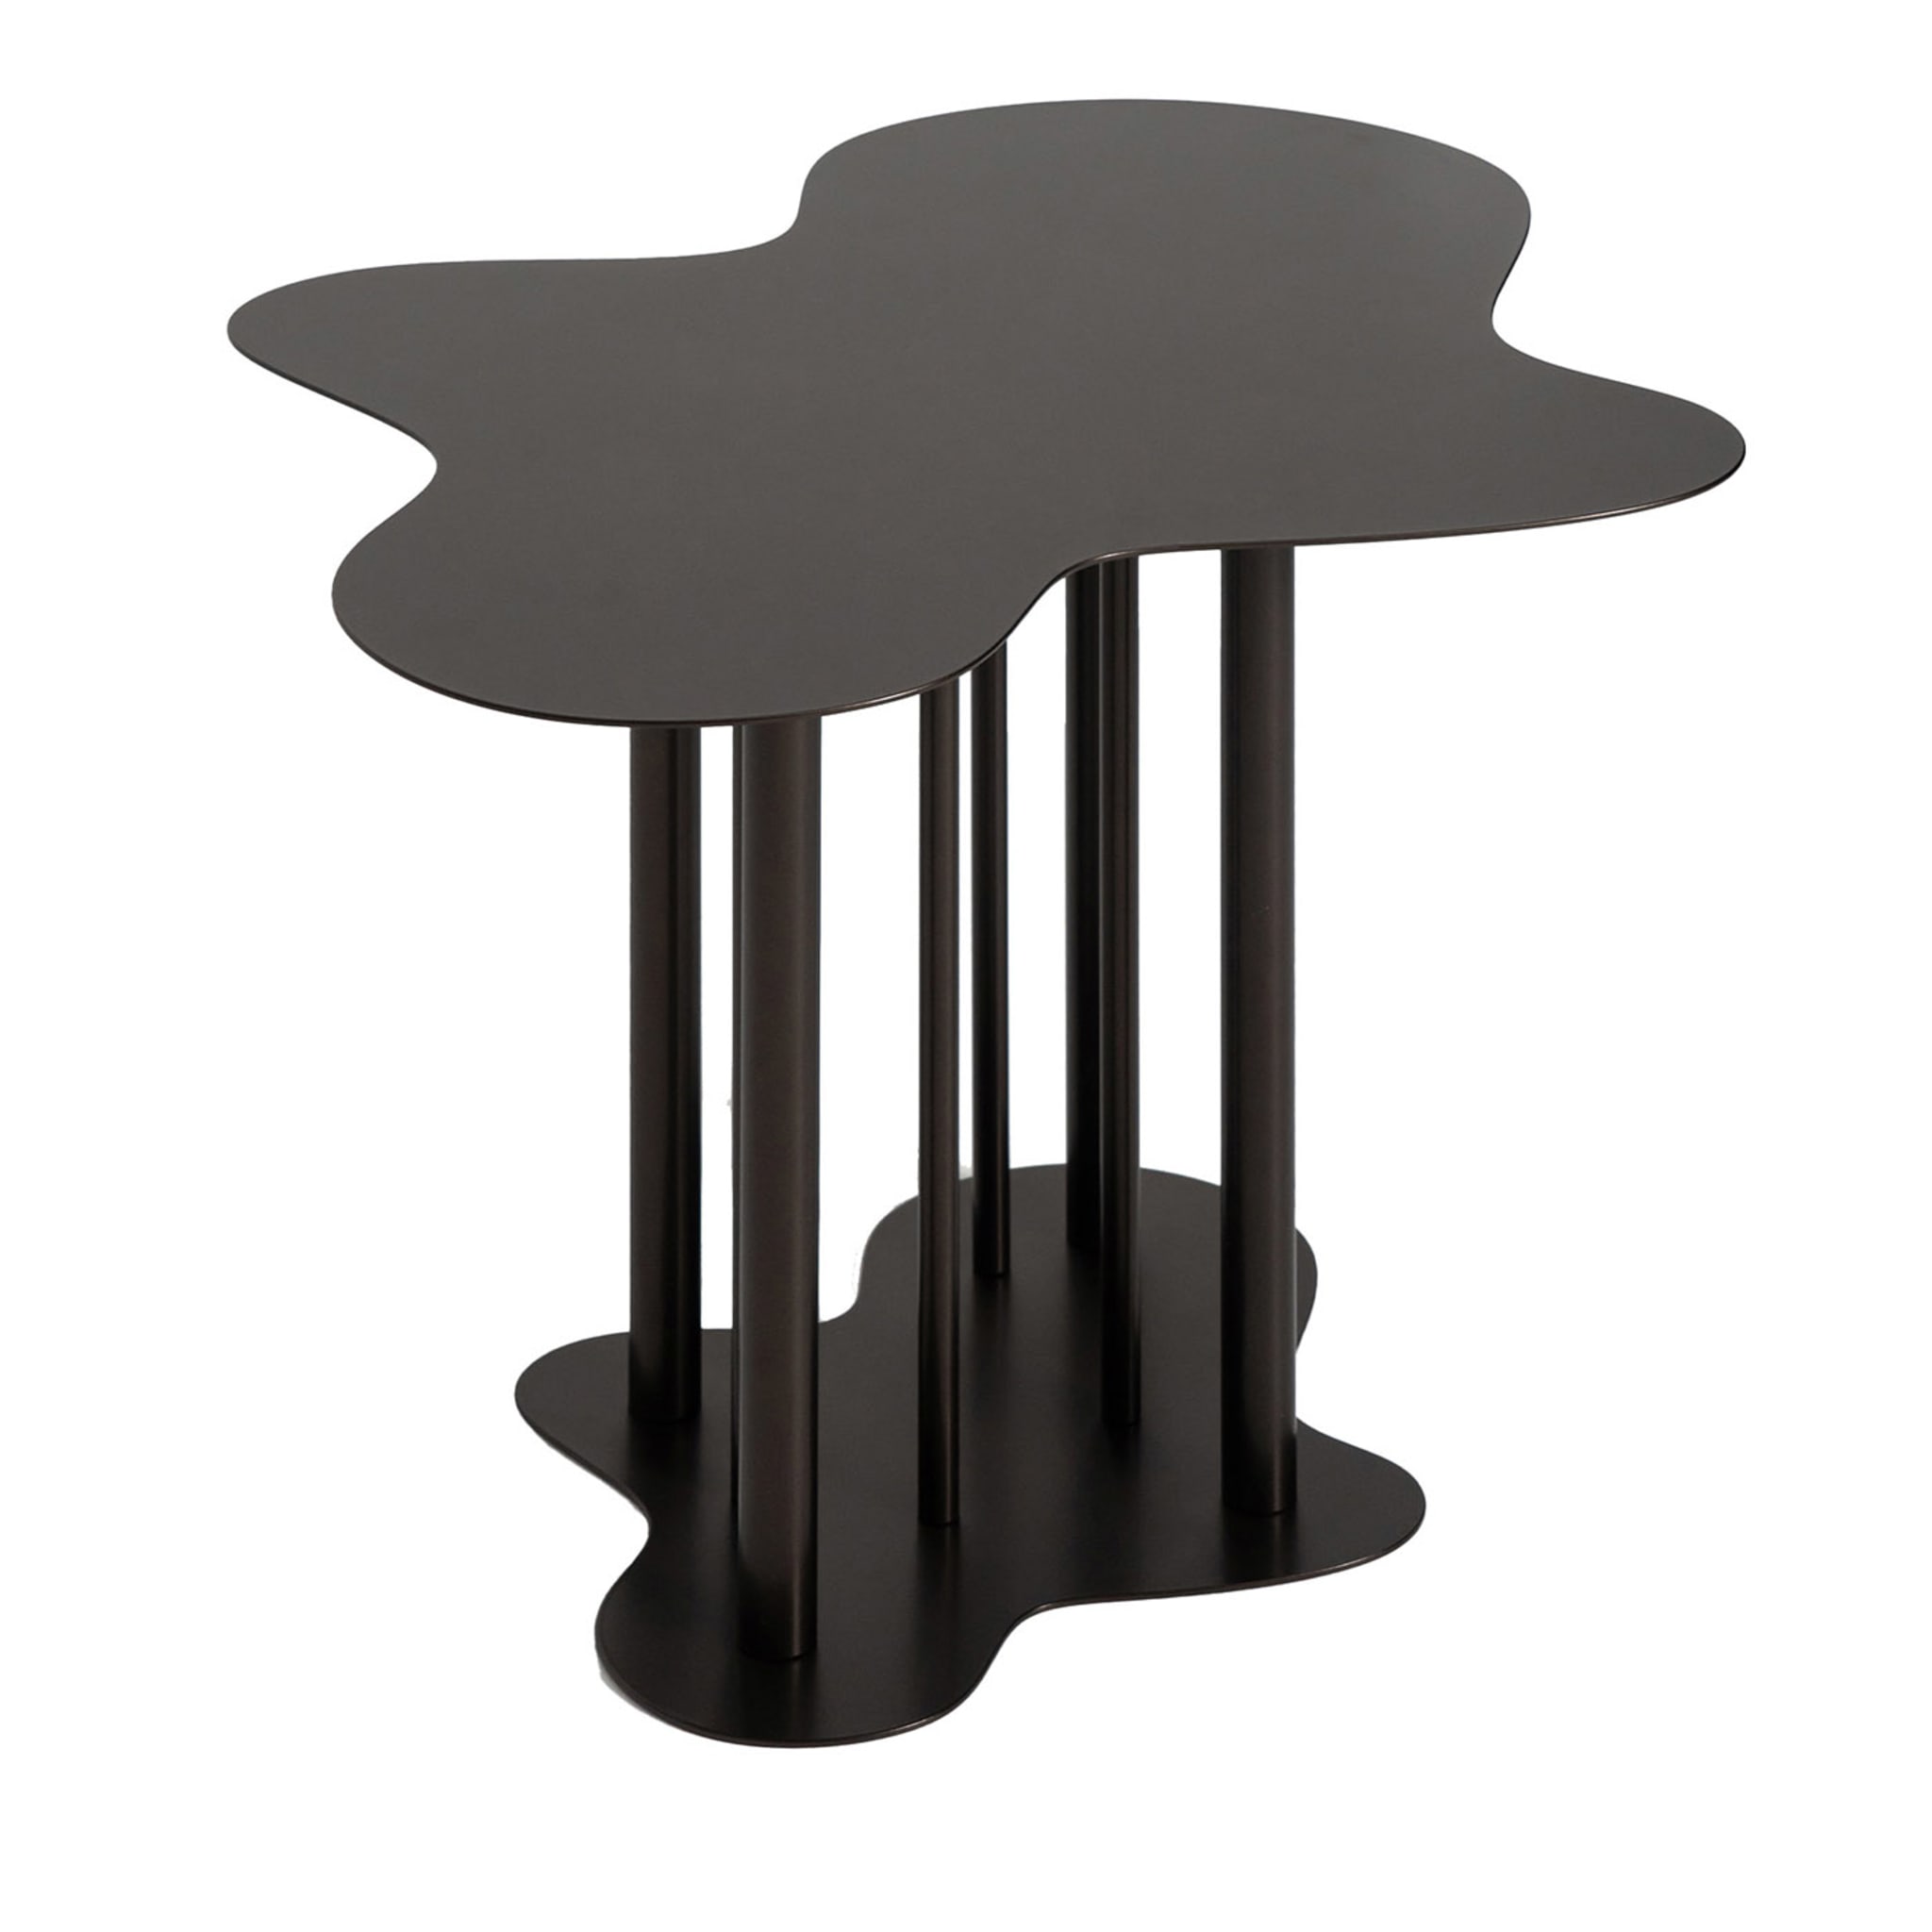 Nuvola 03 Bronze Side Table by Mario Cucinella - Main view